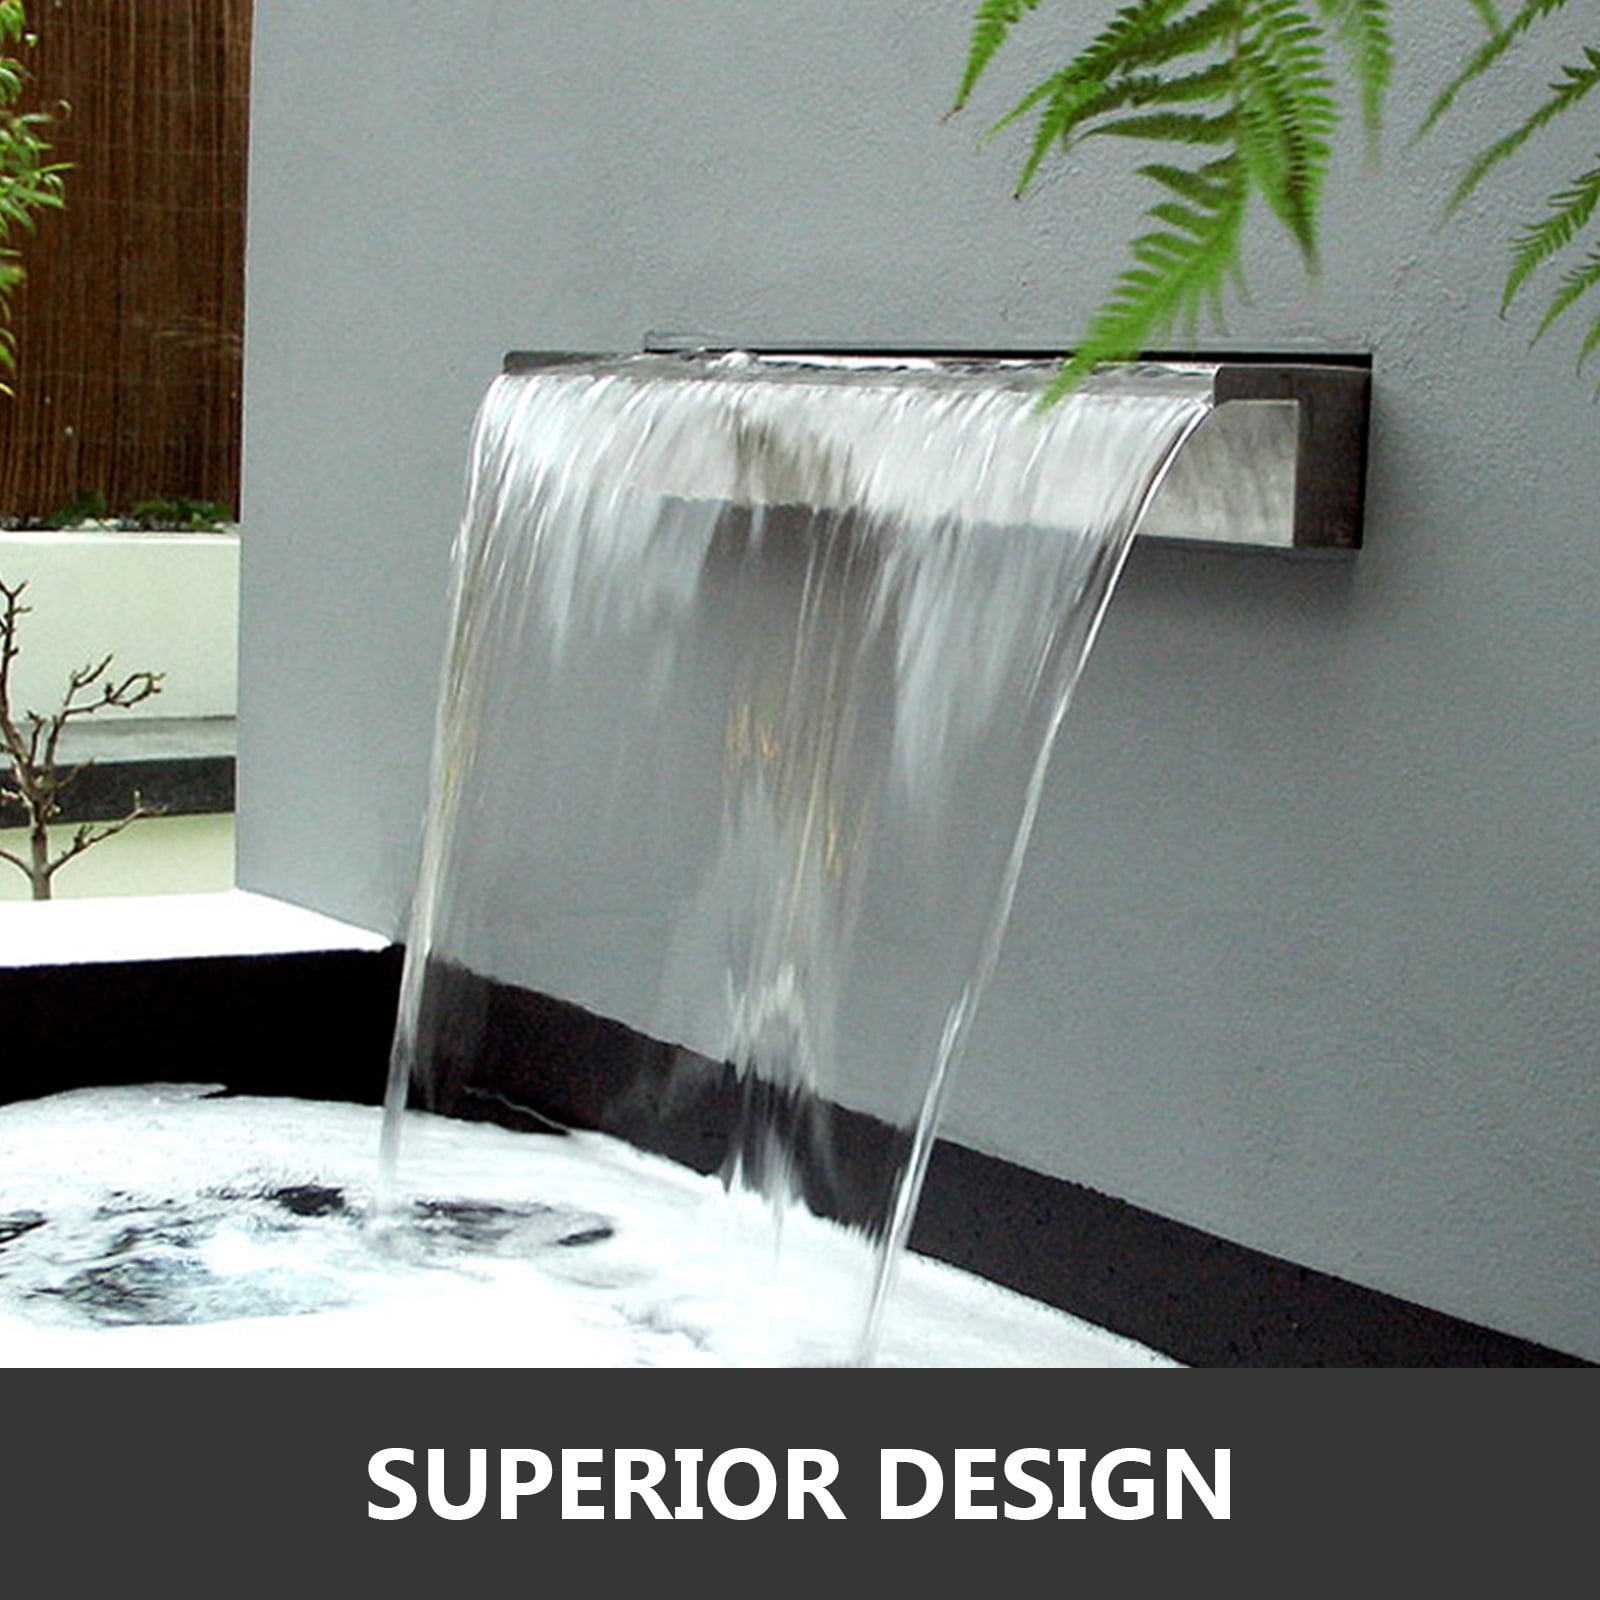 59/" New Details about  / Rectangular Waterfall Pool Fountain Cascade Swimming Pool Decor 11.8/"